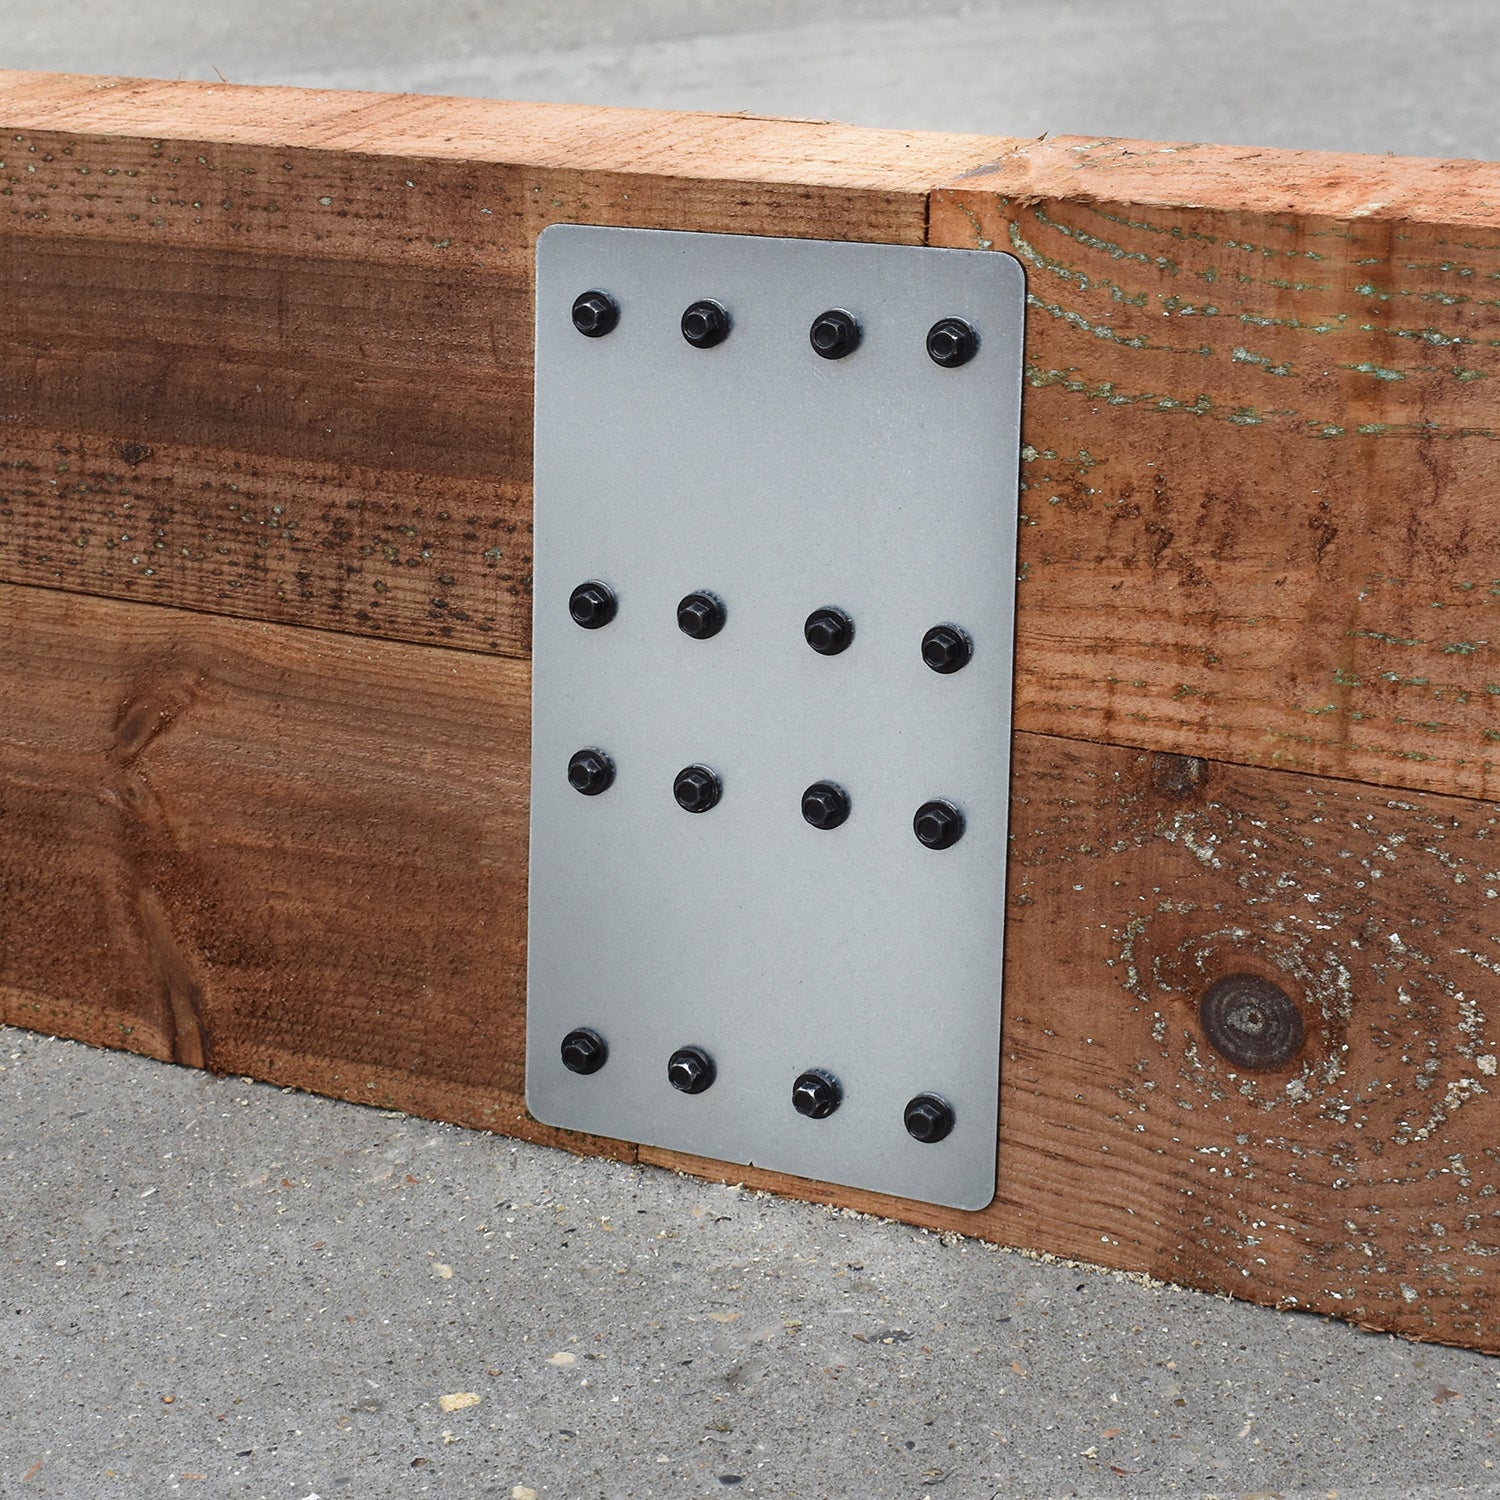 Closeup of the bracket used to secure the straight edges of the railway sleepers in rectangular planters.